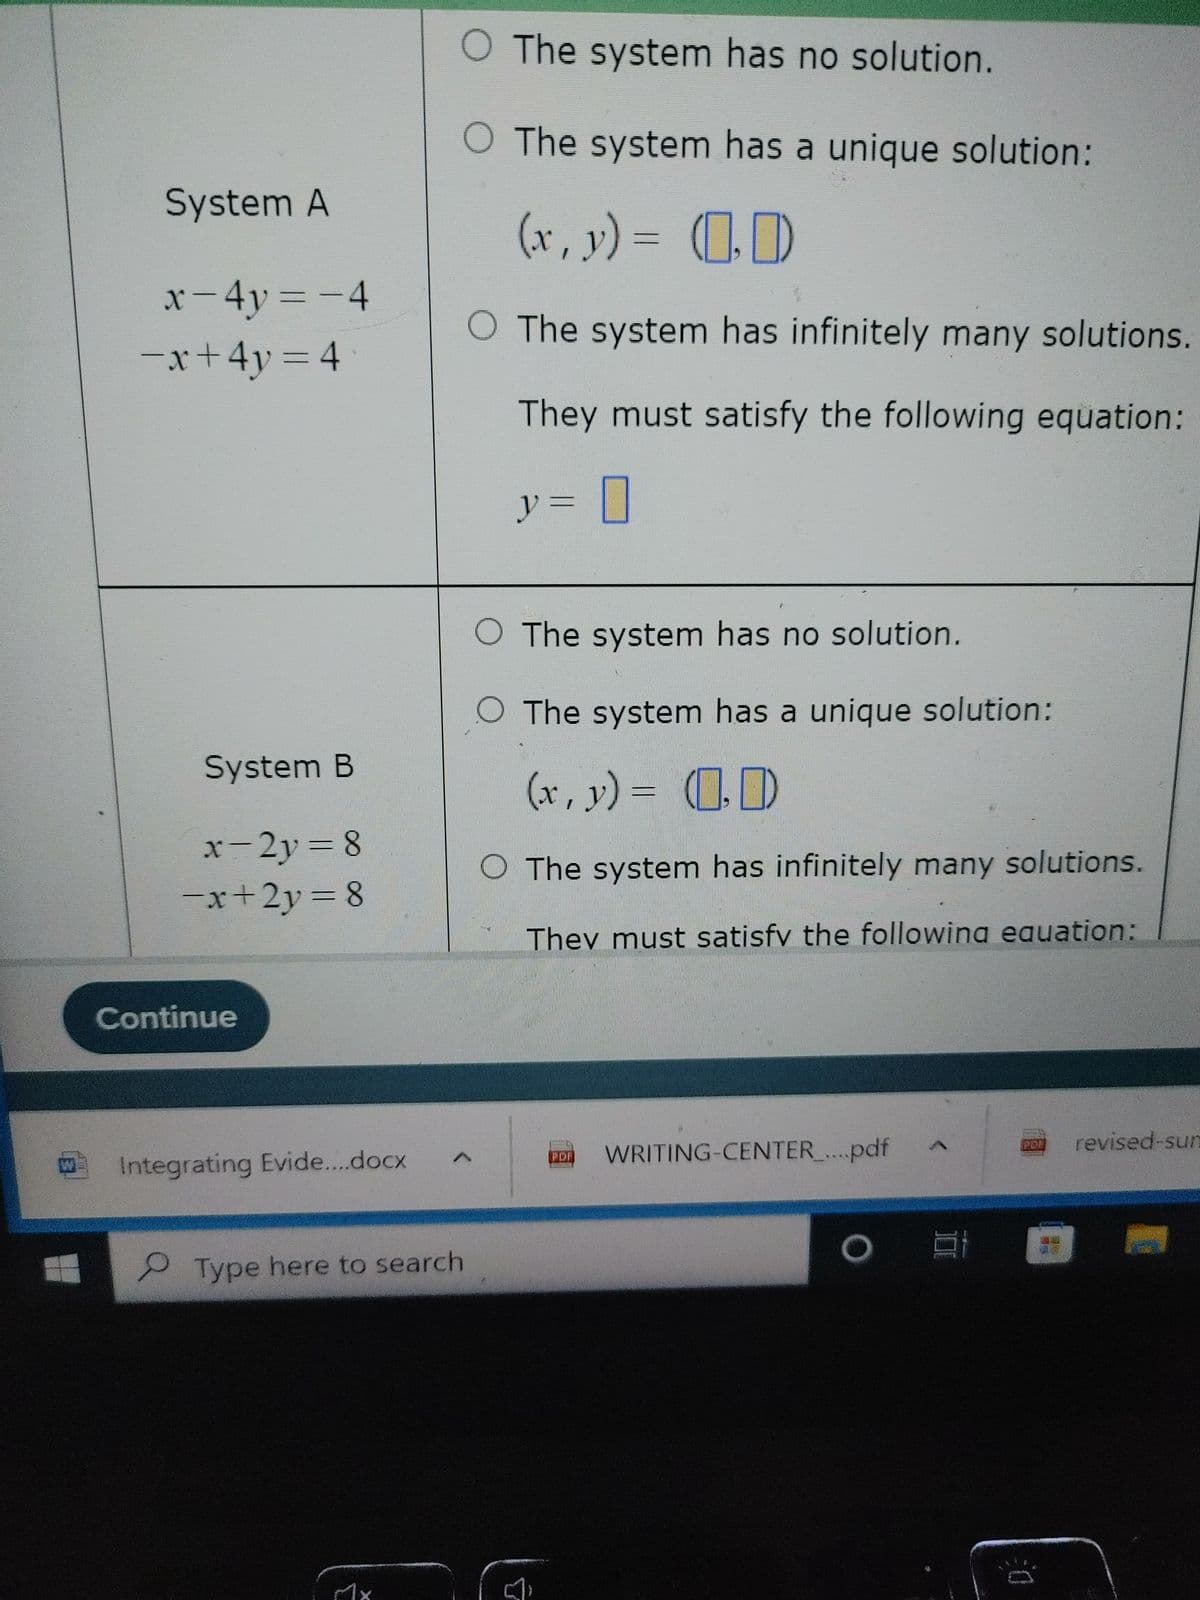 System A
x - 4y = -4
-x+4y=4
System B
x-2y = 8
-x+2y=8
Continue
Integrating Evide....docx
Type here to search
[
O The system has no solution.
The system has a unique solution:
(x, y) = (₂0)
O The system has infinitely many solutions.
They must satisfy the following equation:
= 0
y =
O The system has no solution.
O The system has a unique solution:
(x, y) = (₂0)
O The system has infinitely many solutions.
They must satisfy the following equation:
PDF
WRITING-CENTER_....pdf
A
O at
POE
0
revised-sun